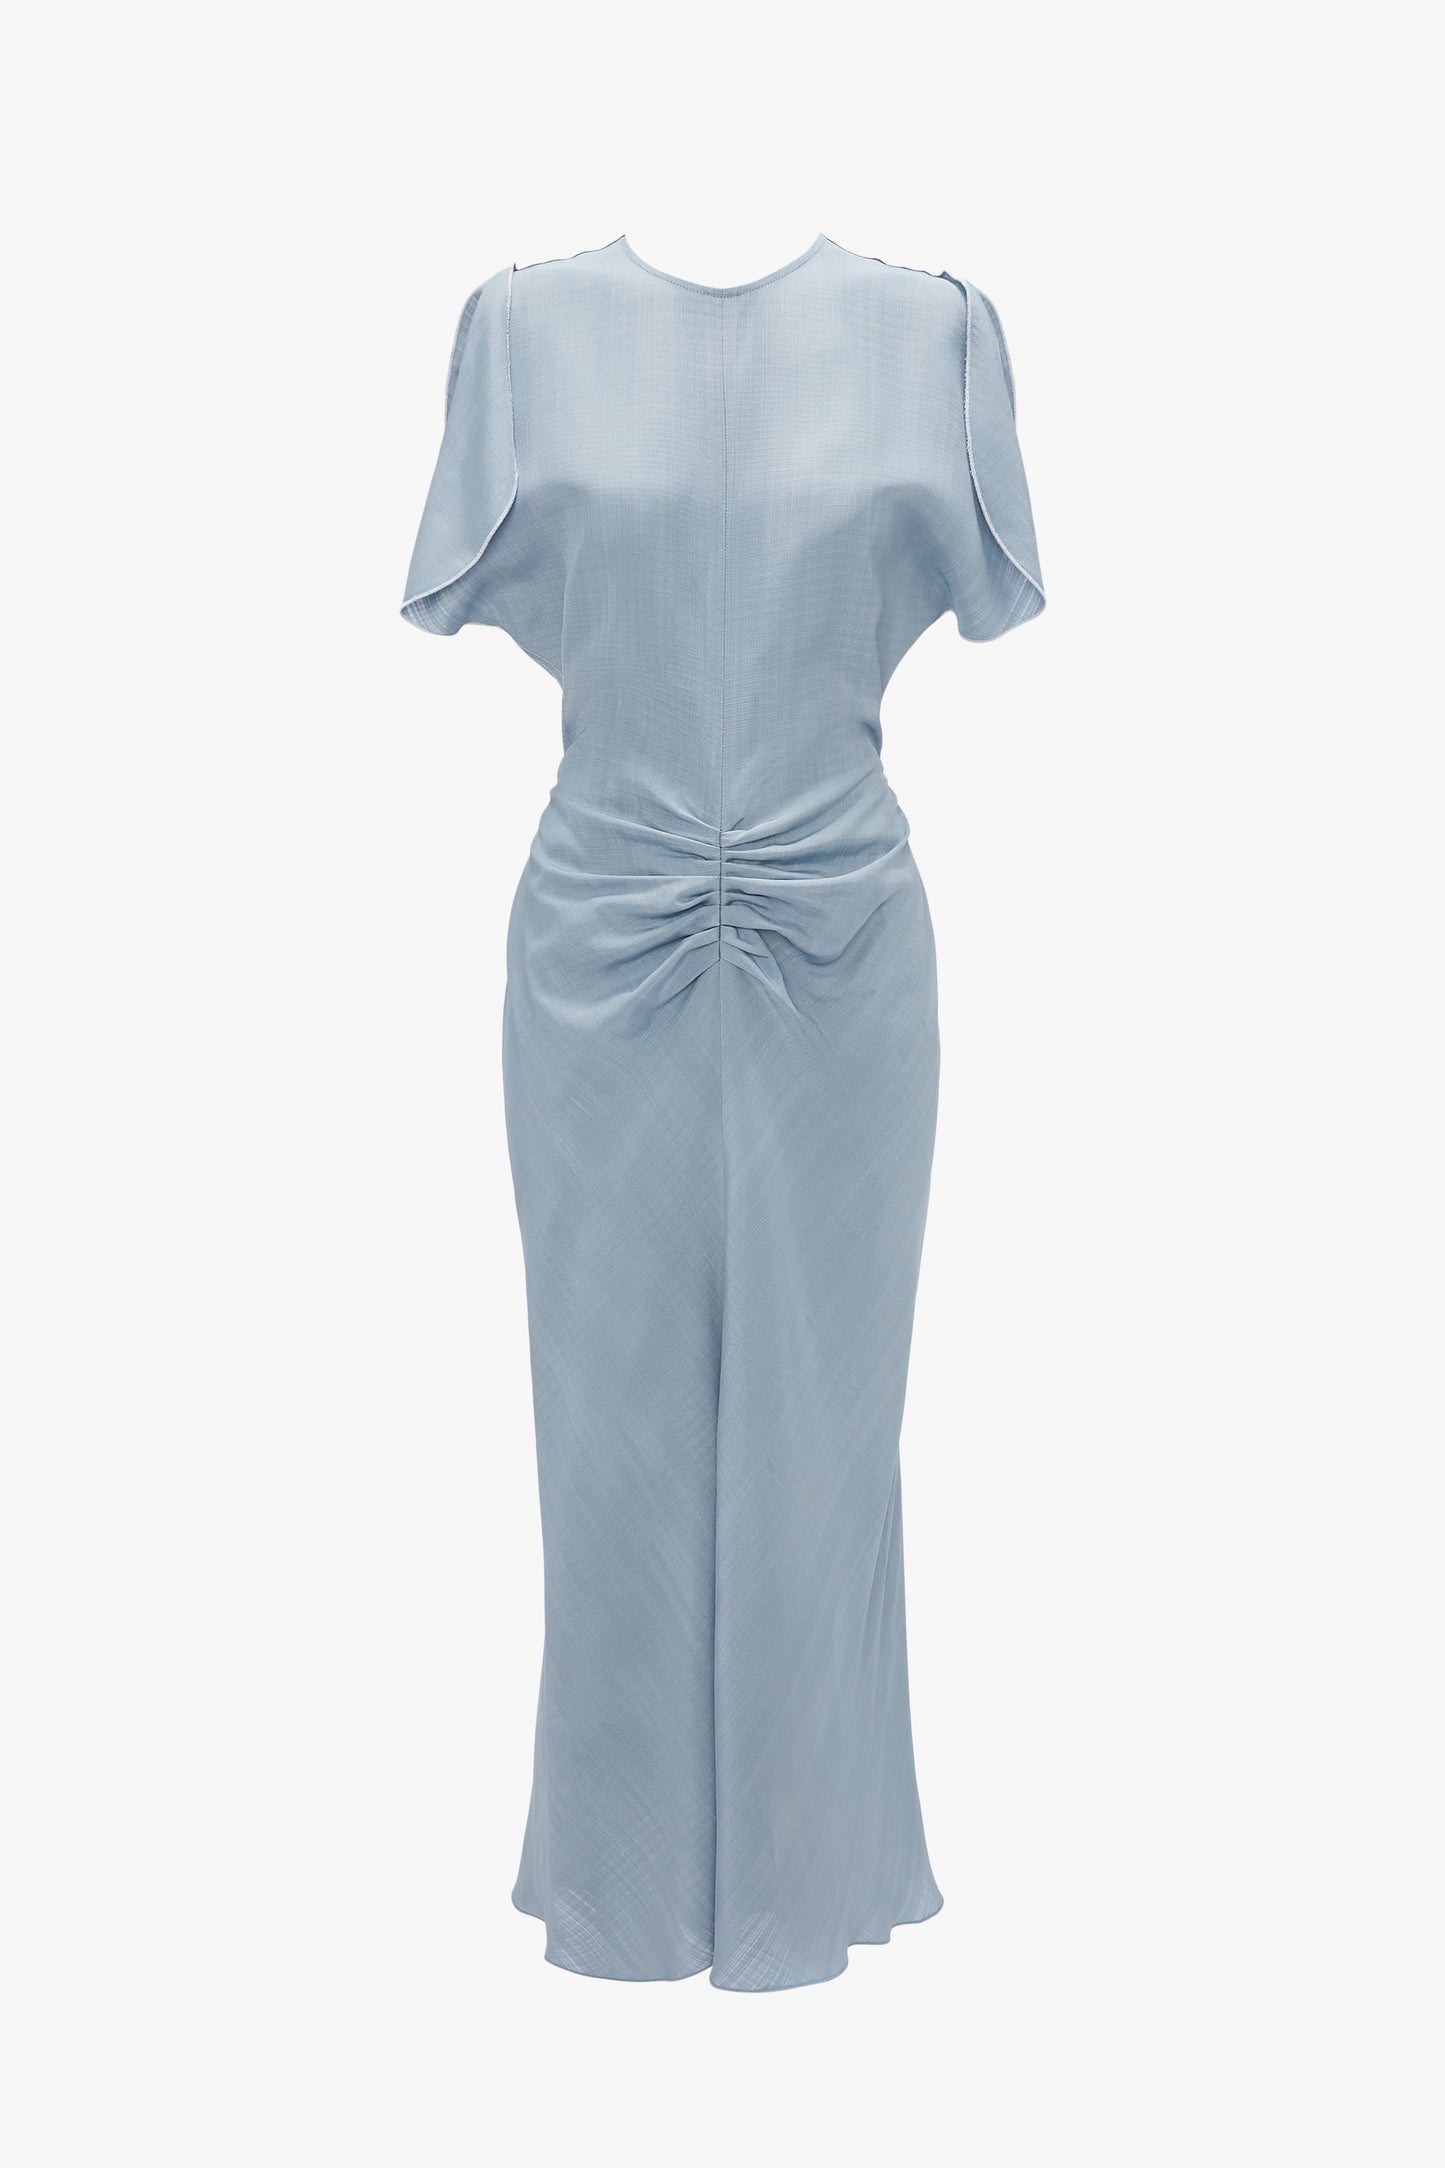 A light blue, knee-length Exclusive Gathered Waist Midi Dress In Pebble by Victoria Beckham with short sleeves and a gathered waist, isolated on a white background.